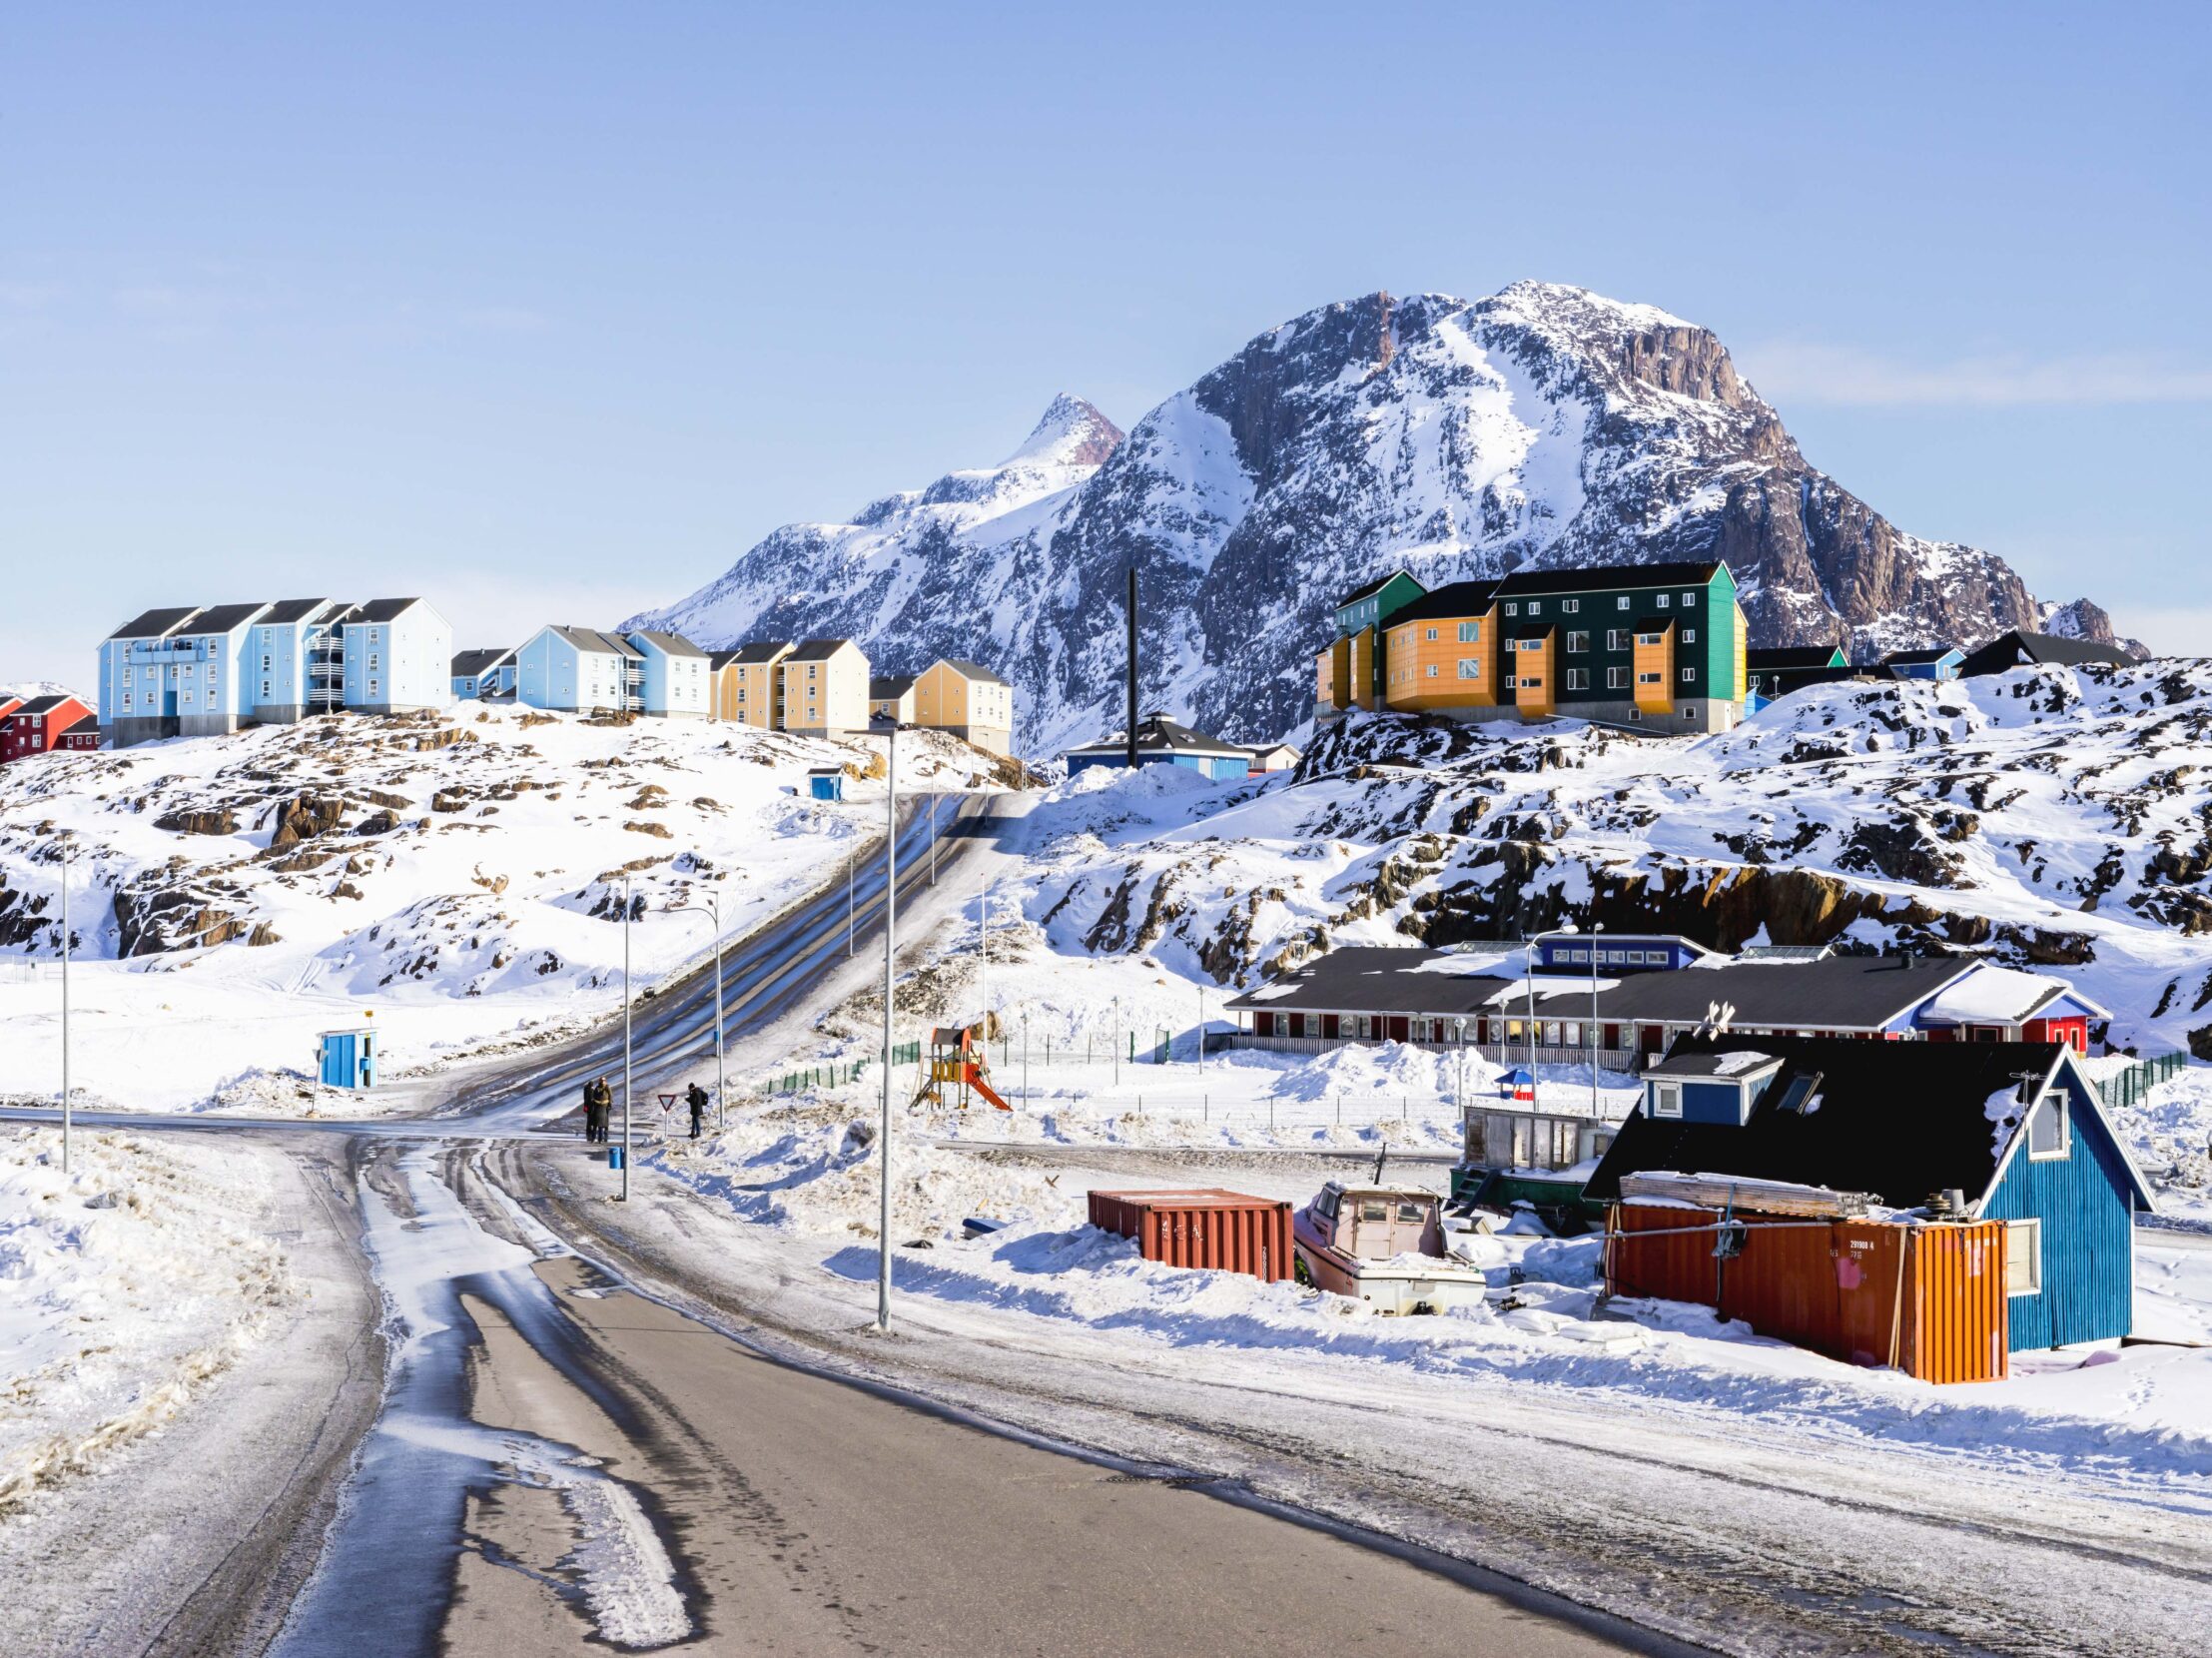 A paved road in a sunny, snowy town of brightly colored buildings leads to a rocky mountain dusted with snow.